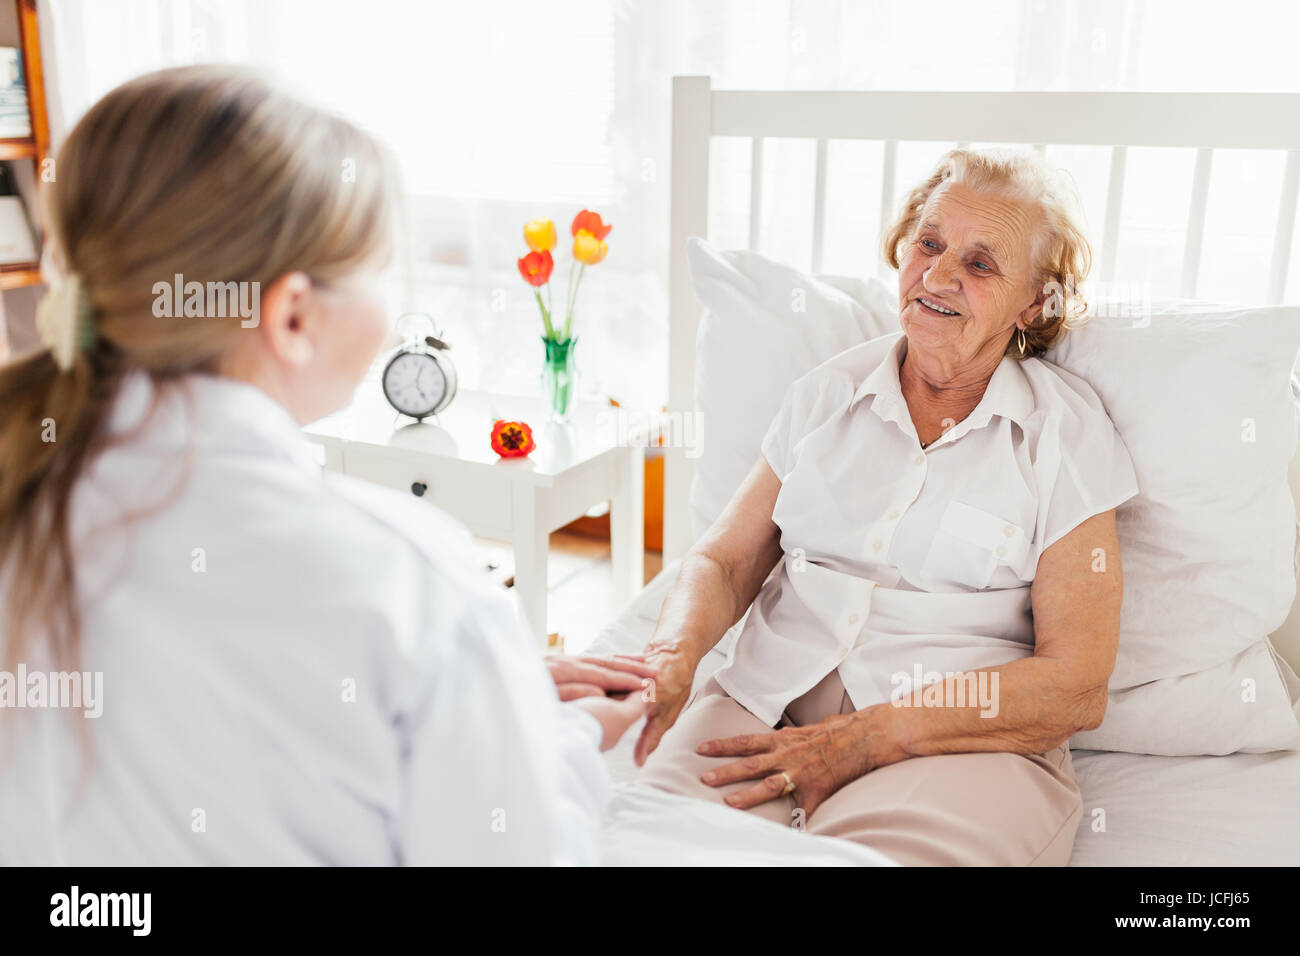 Providing care and support for elderly. Doctor visiting elderly patient at home. Stock Photo